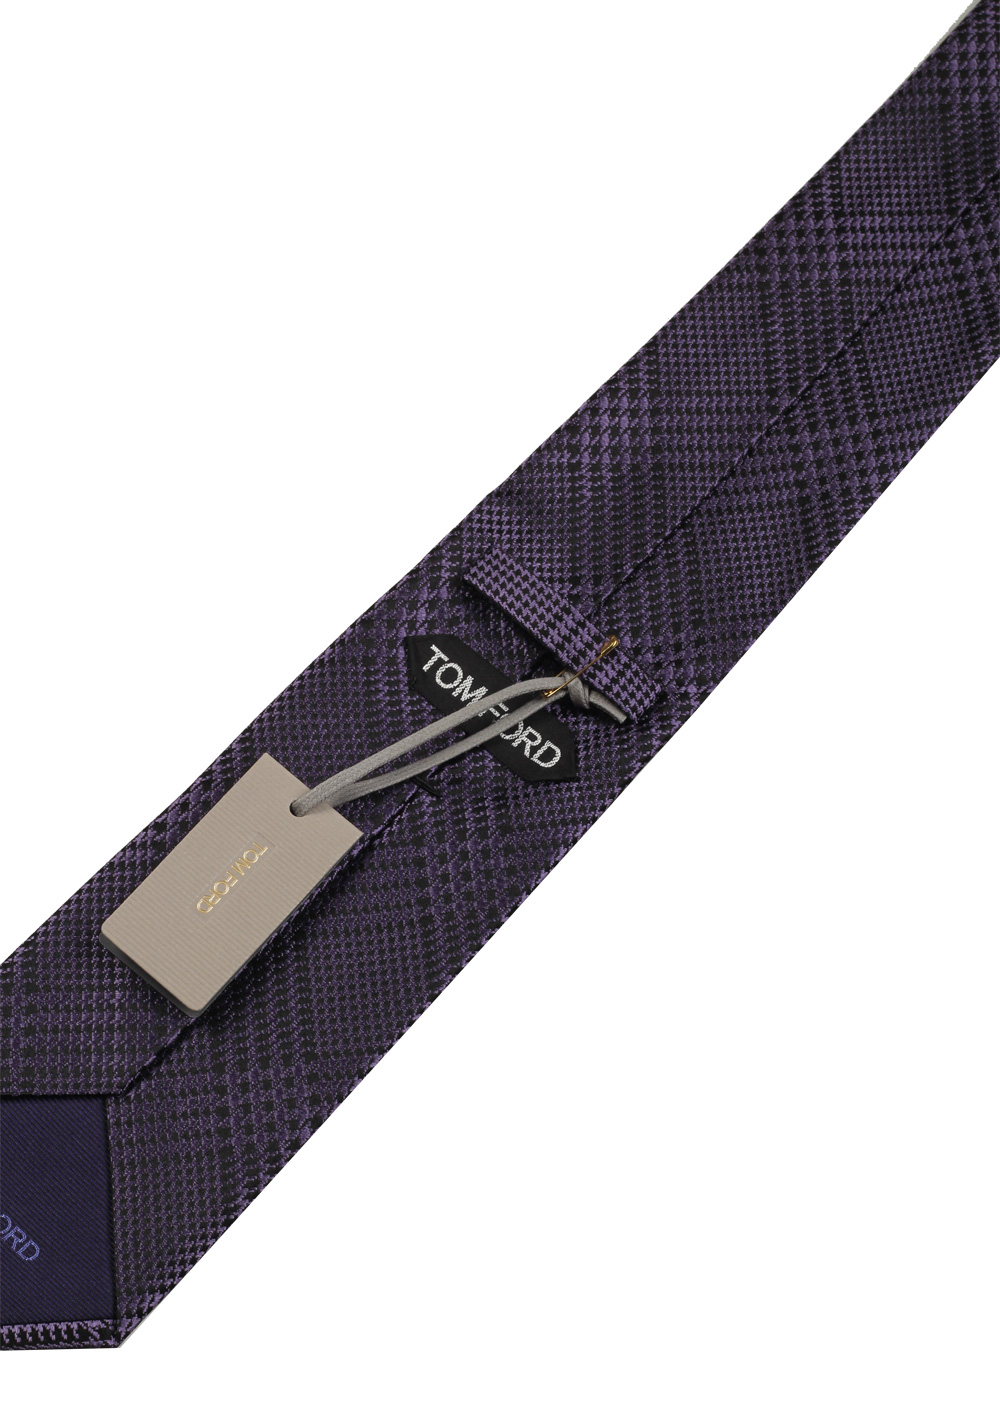 TOM FORD Checked Purple Tie In Silk | Costume Limité